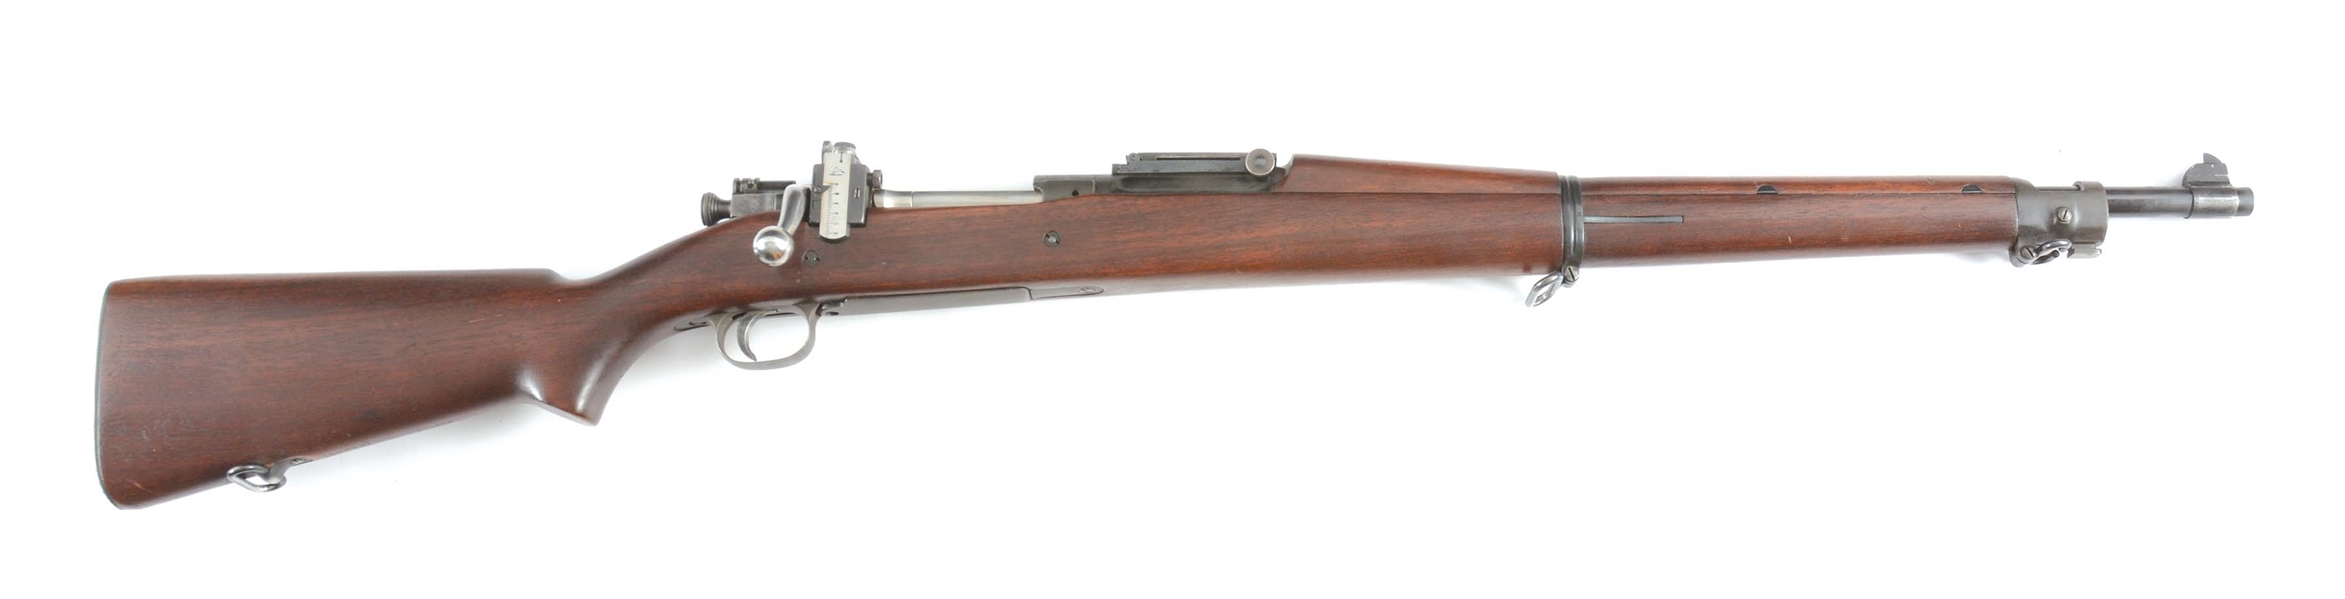 1903a1 springfield serial numbers